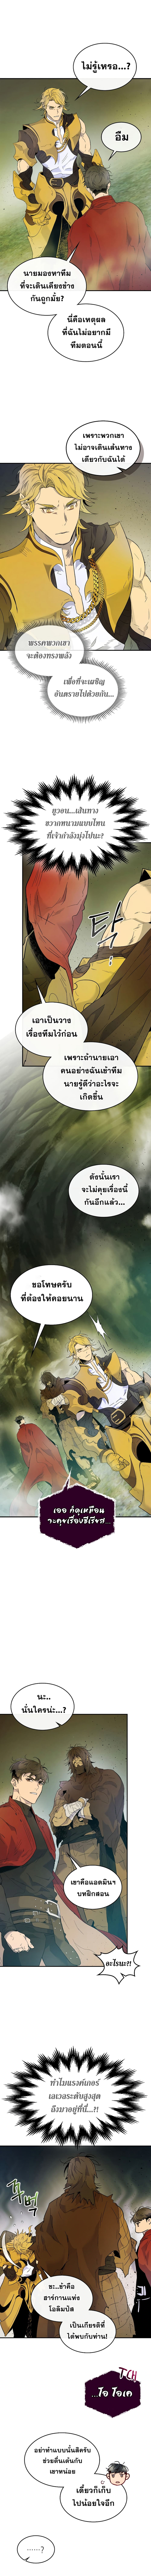 Leveling With The Gods22 (9)